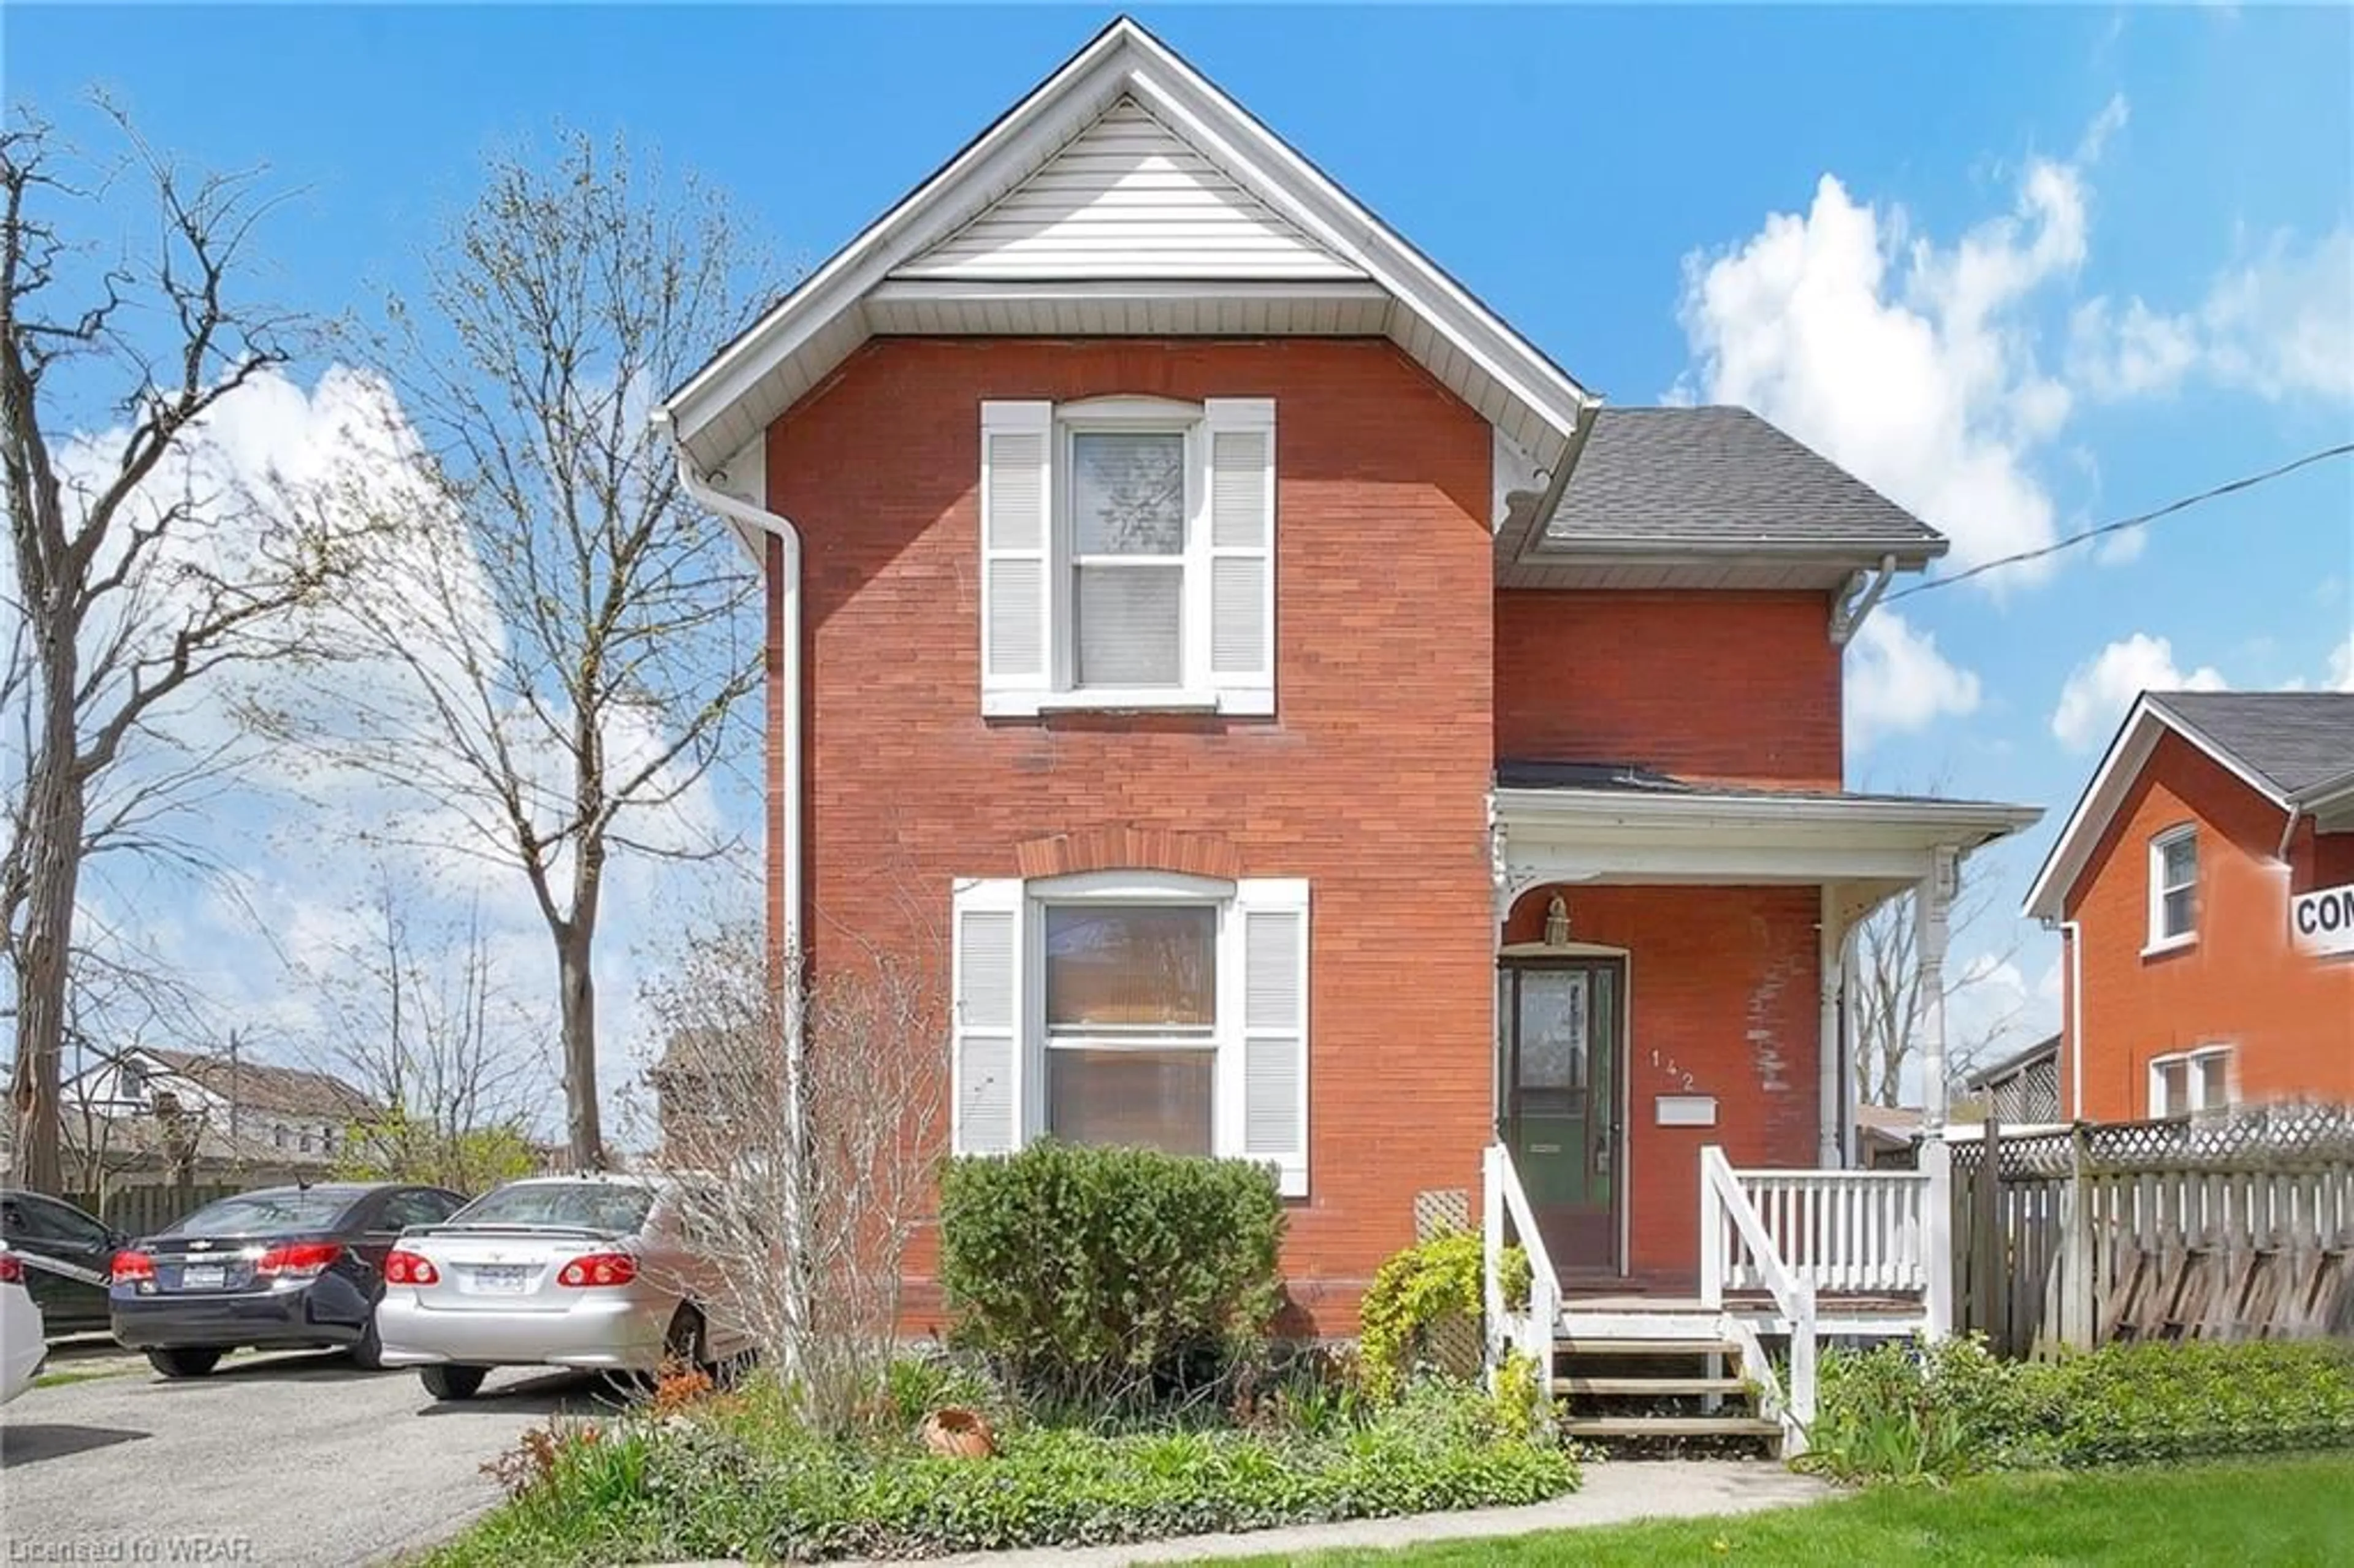 Home with brick exterior material for 142 Dolph St, Cambridge Ontario N3H 2A4